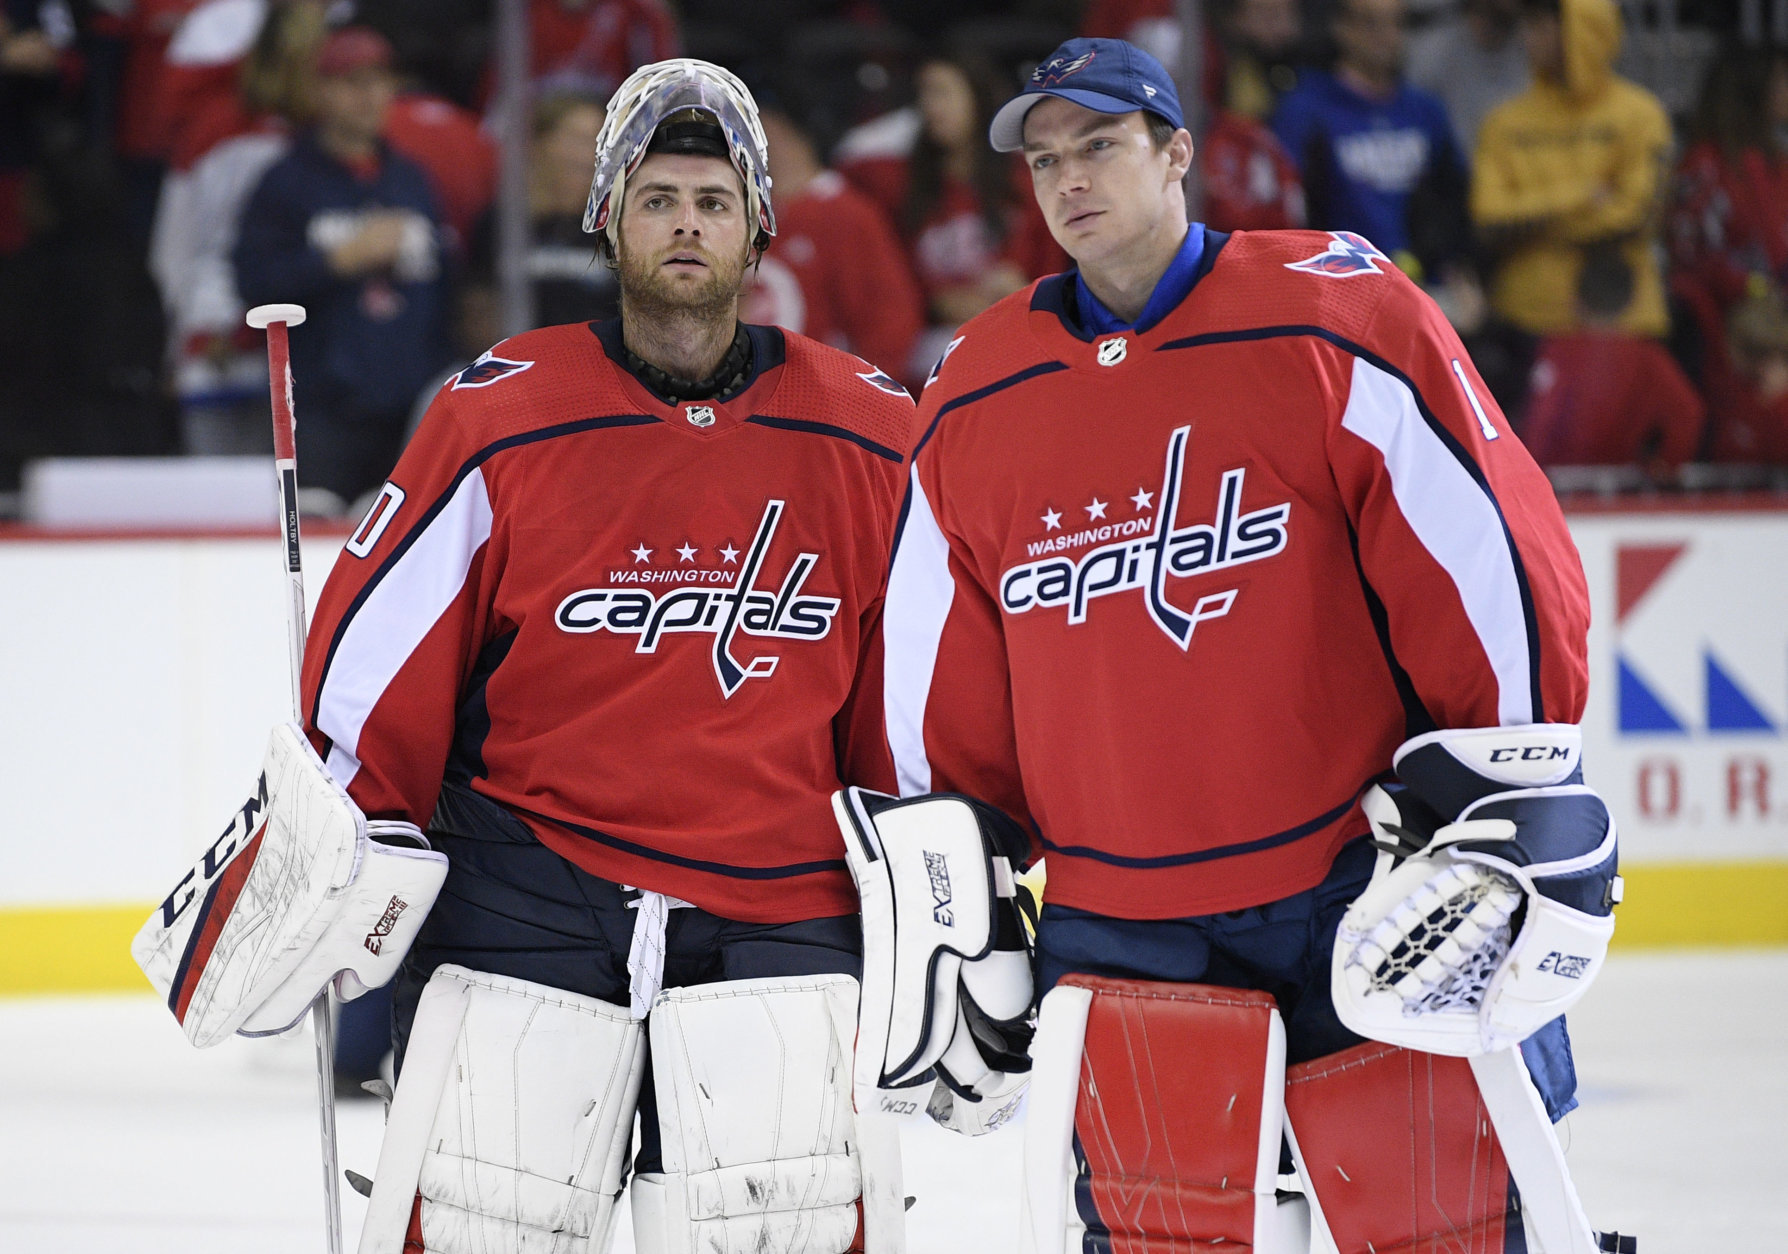 Washington Capitals goaltenders Braden Holtby, left, and Pheonix Copley, right, leave the ice after an NHL preseason hockey game against the St. Louis Blues, Sunday, Sept. 30, 2018, in Washington. The Capitals won 5-2. (AP Photo/Nick Wass)